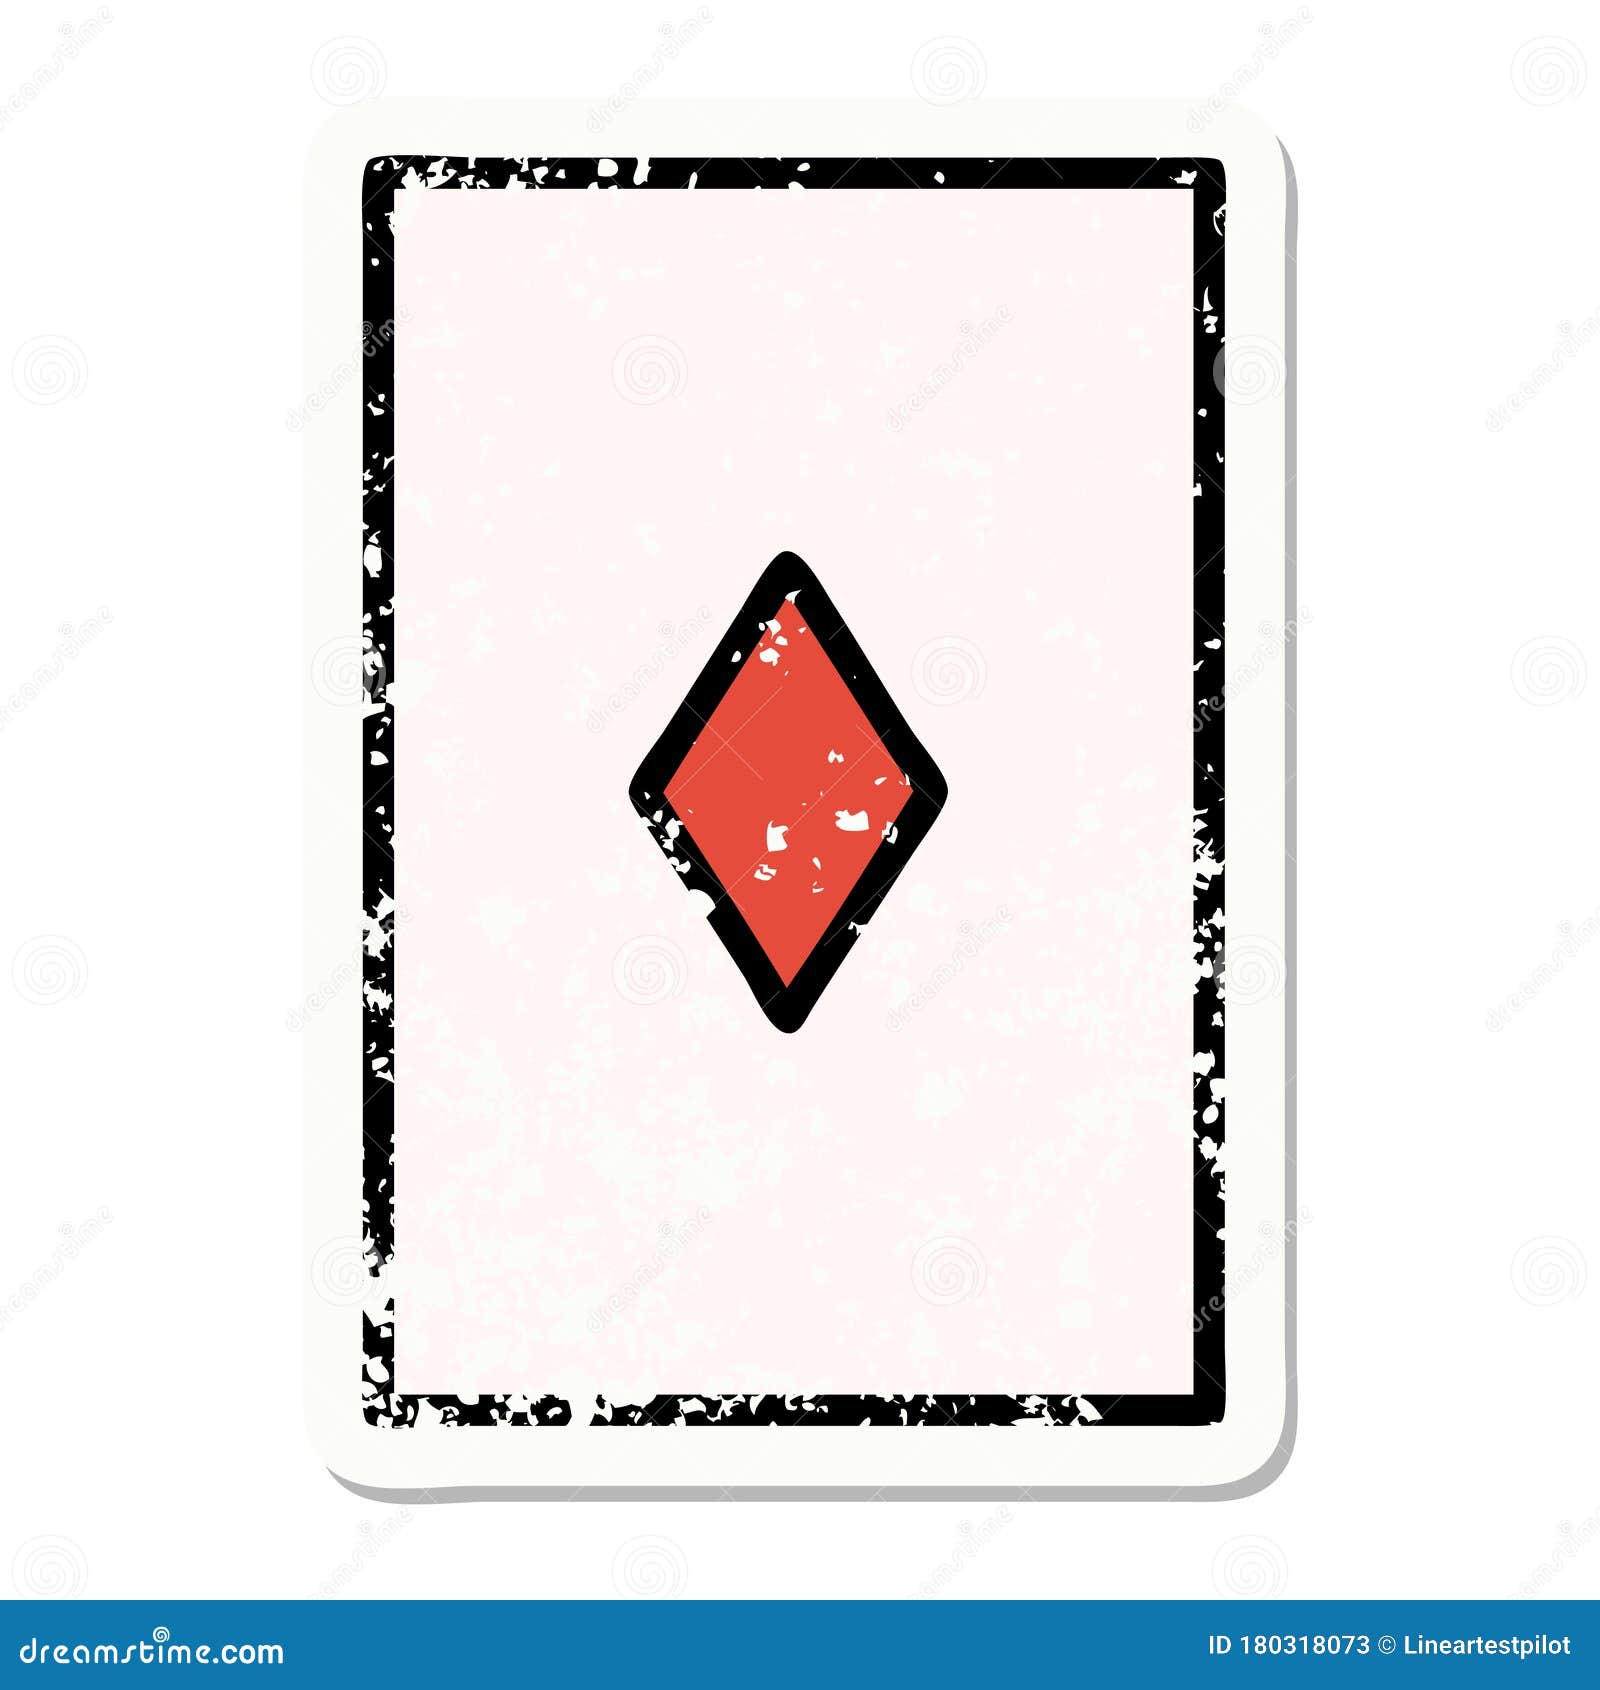 Ace of Diamonds  The Three Musketeers by karinyan  Playing cards art  Playing cards design Card tattoo